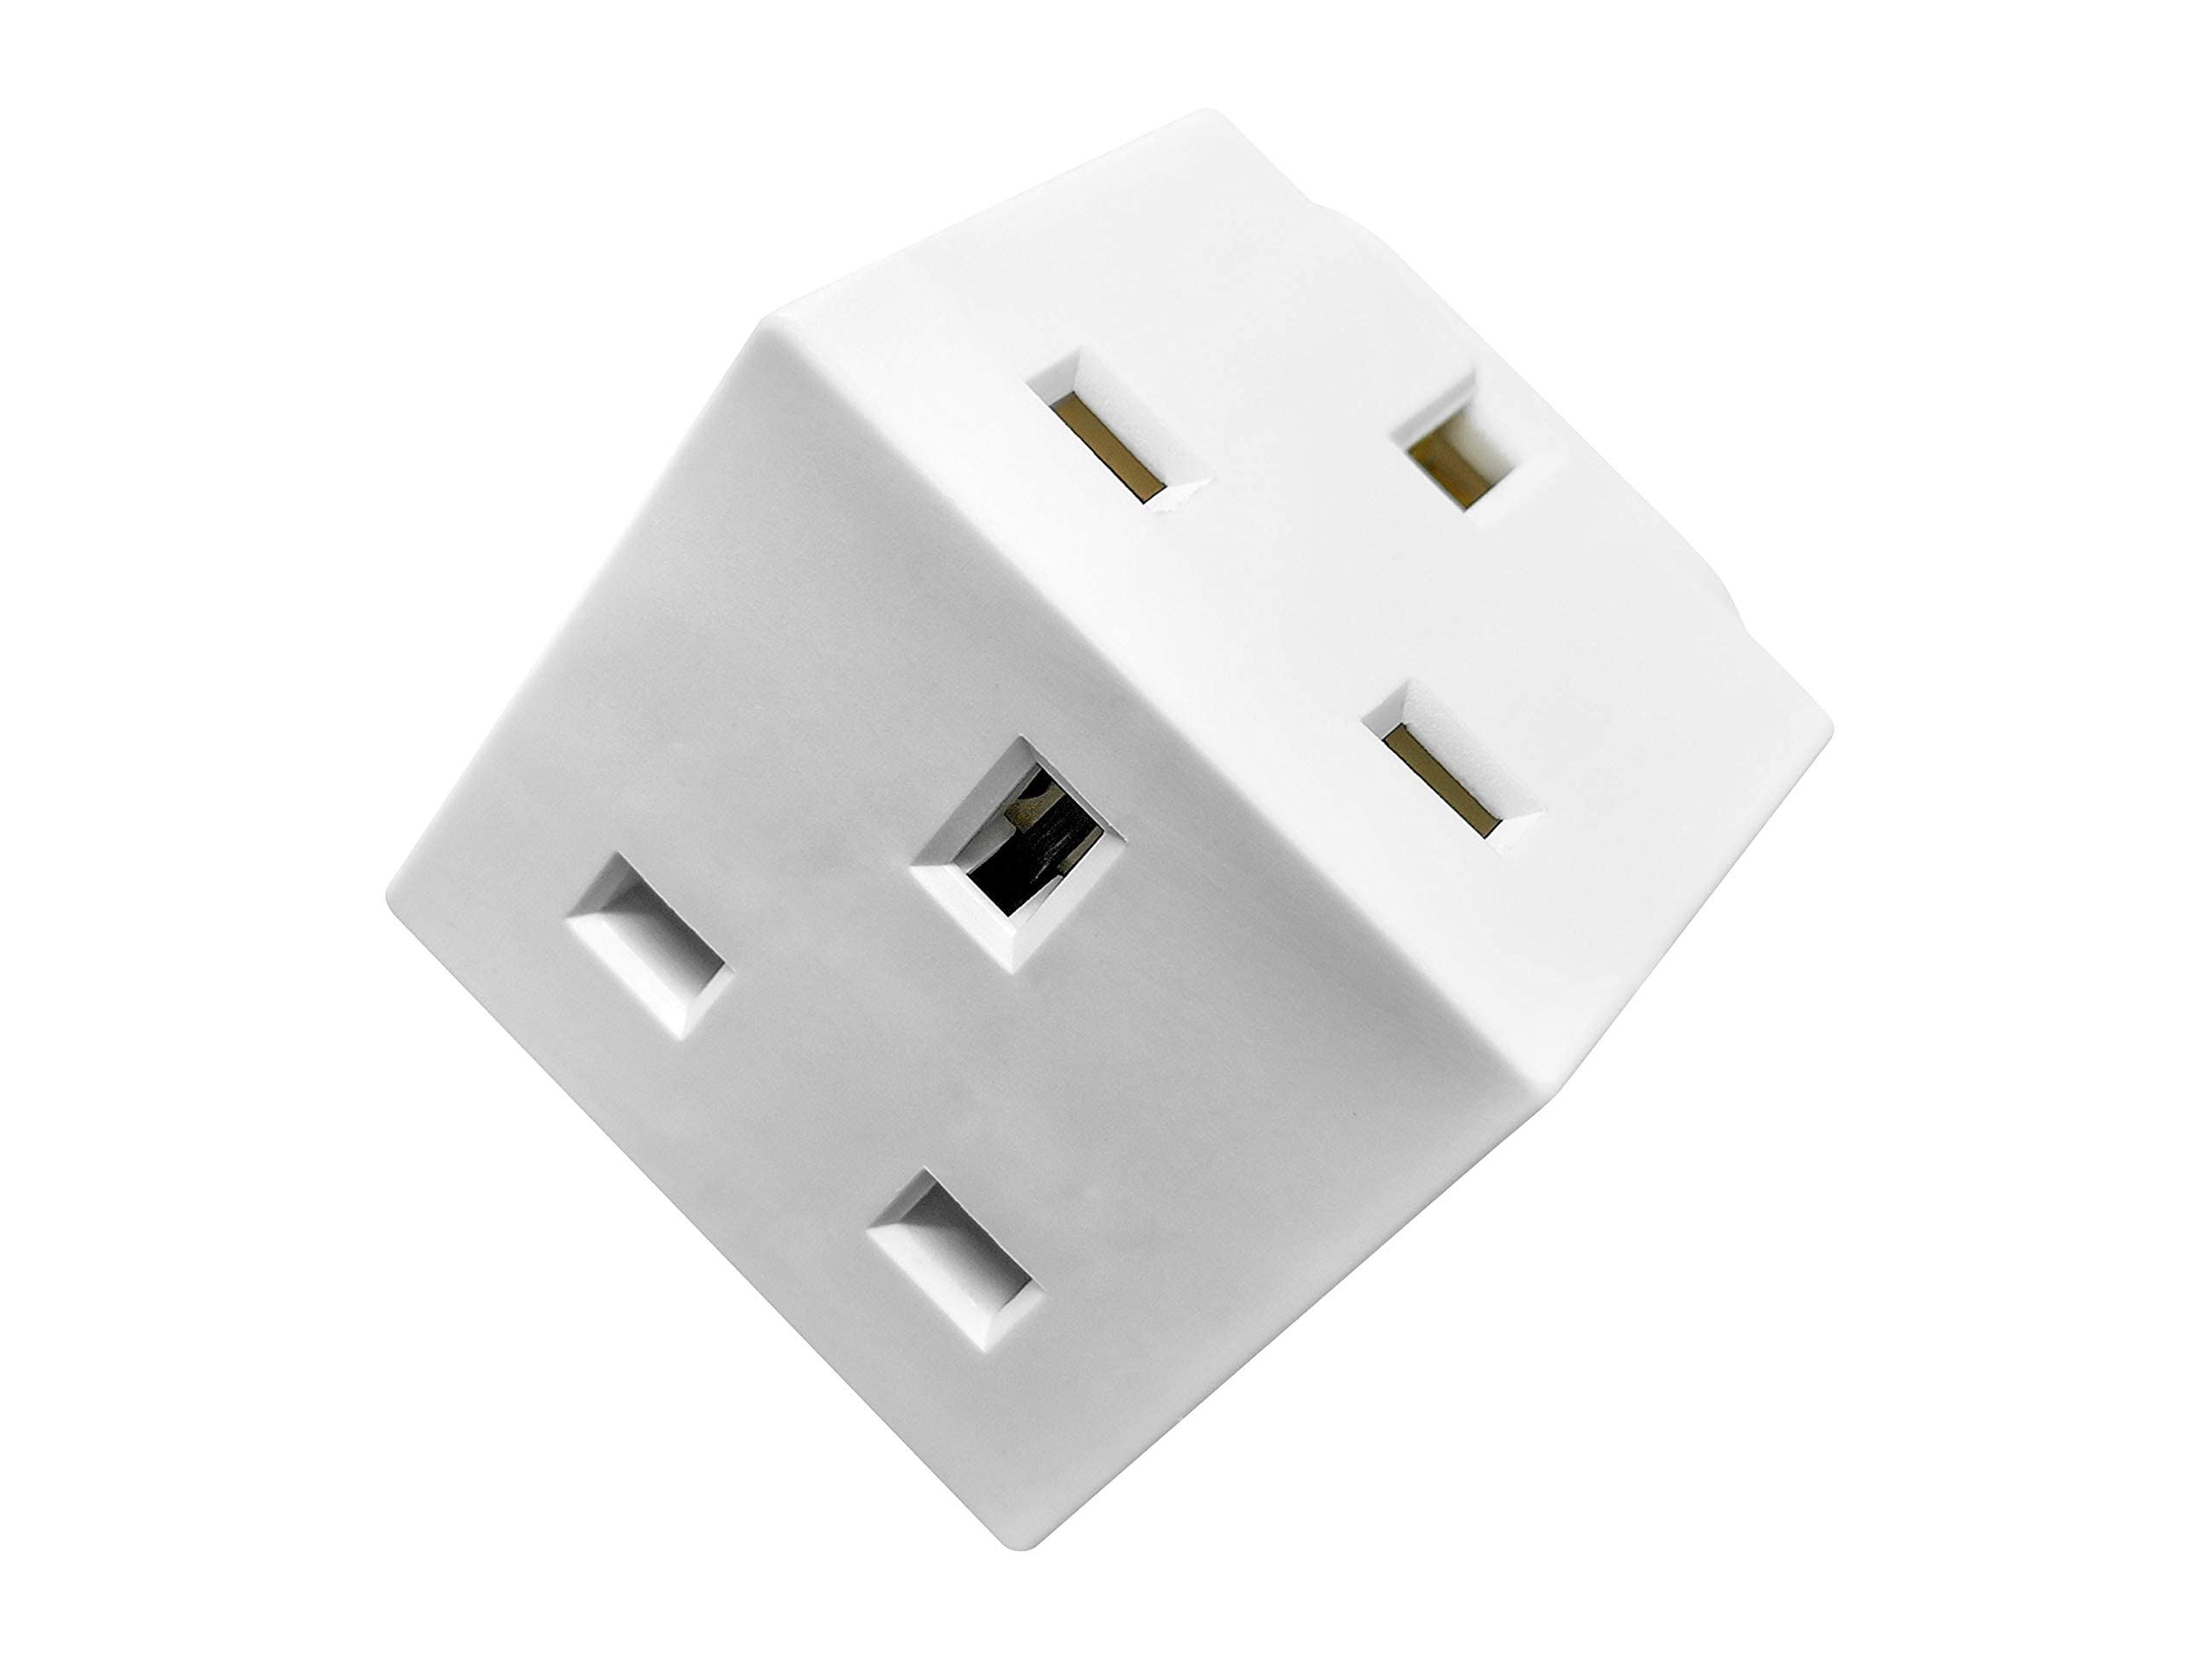 2 Way Multi Plug Adaptor - 3 Pin UK Socket Extender - Power Cube Extension Adapter For Office, TV, Kitchen and Indoor appliances - Double Plug Converter UK - 250V 13 Amp by ServoStars